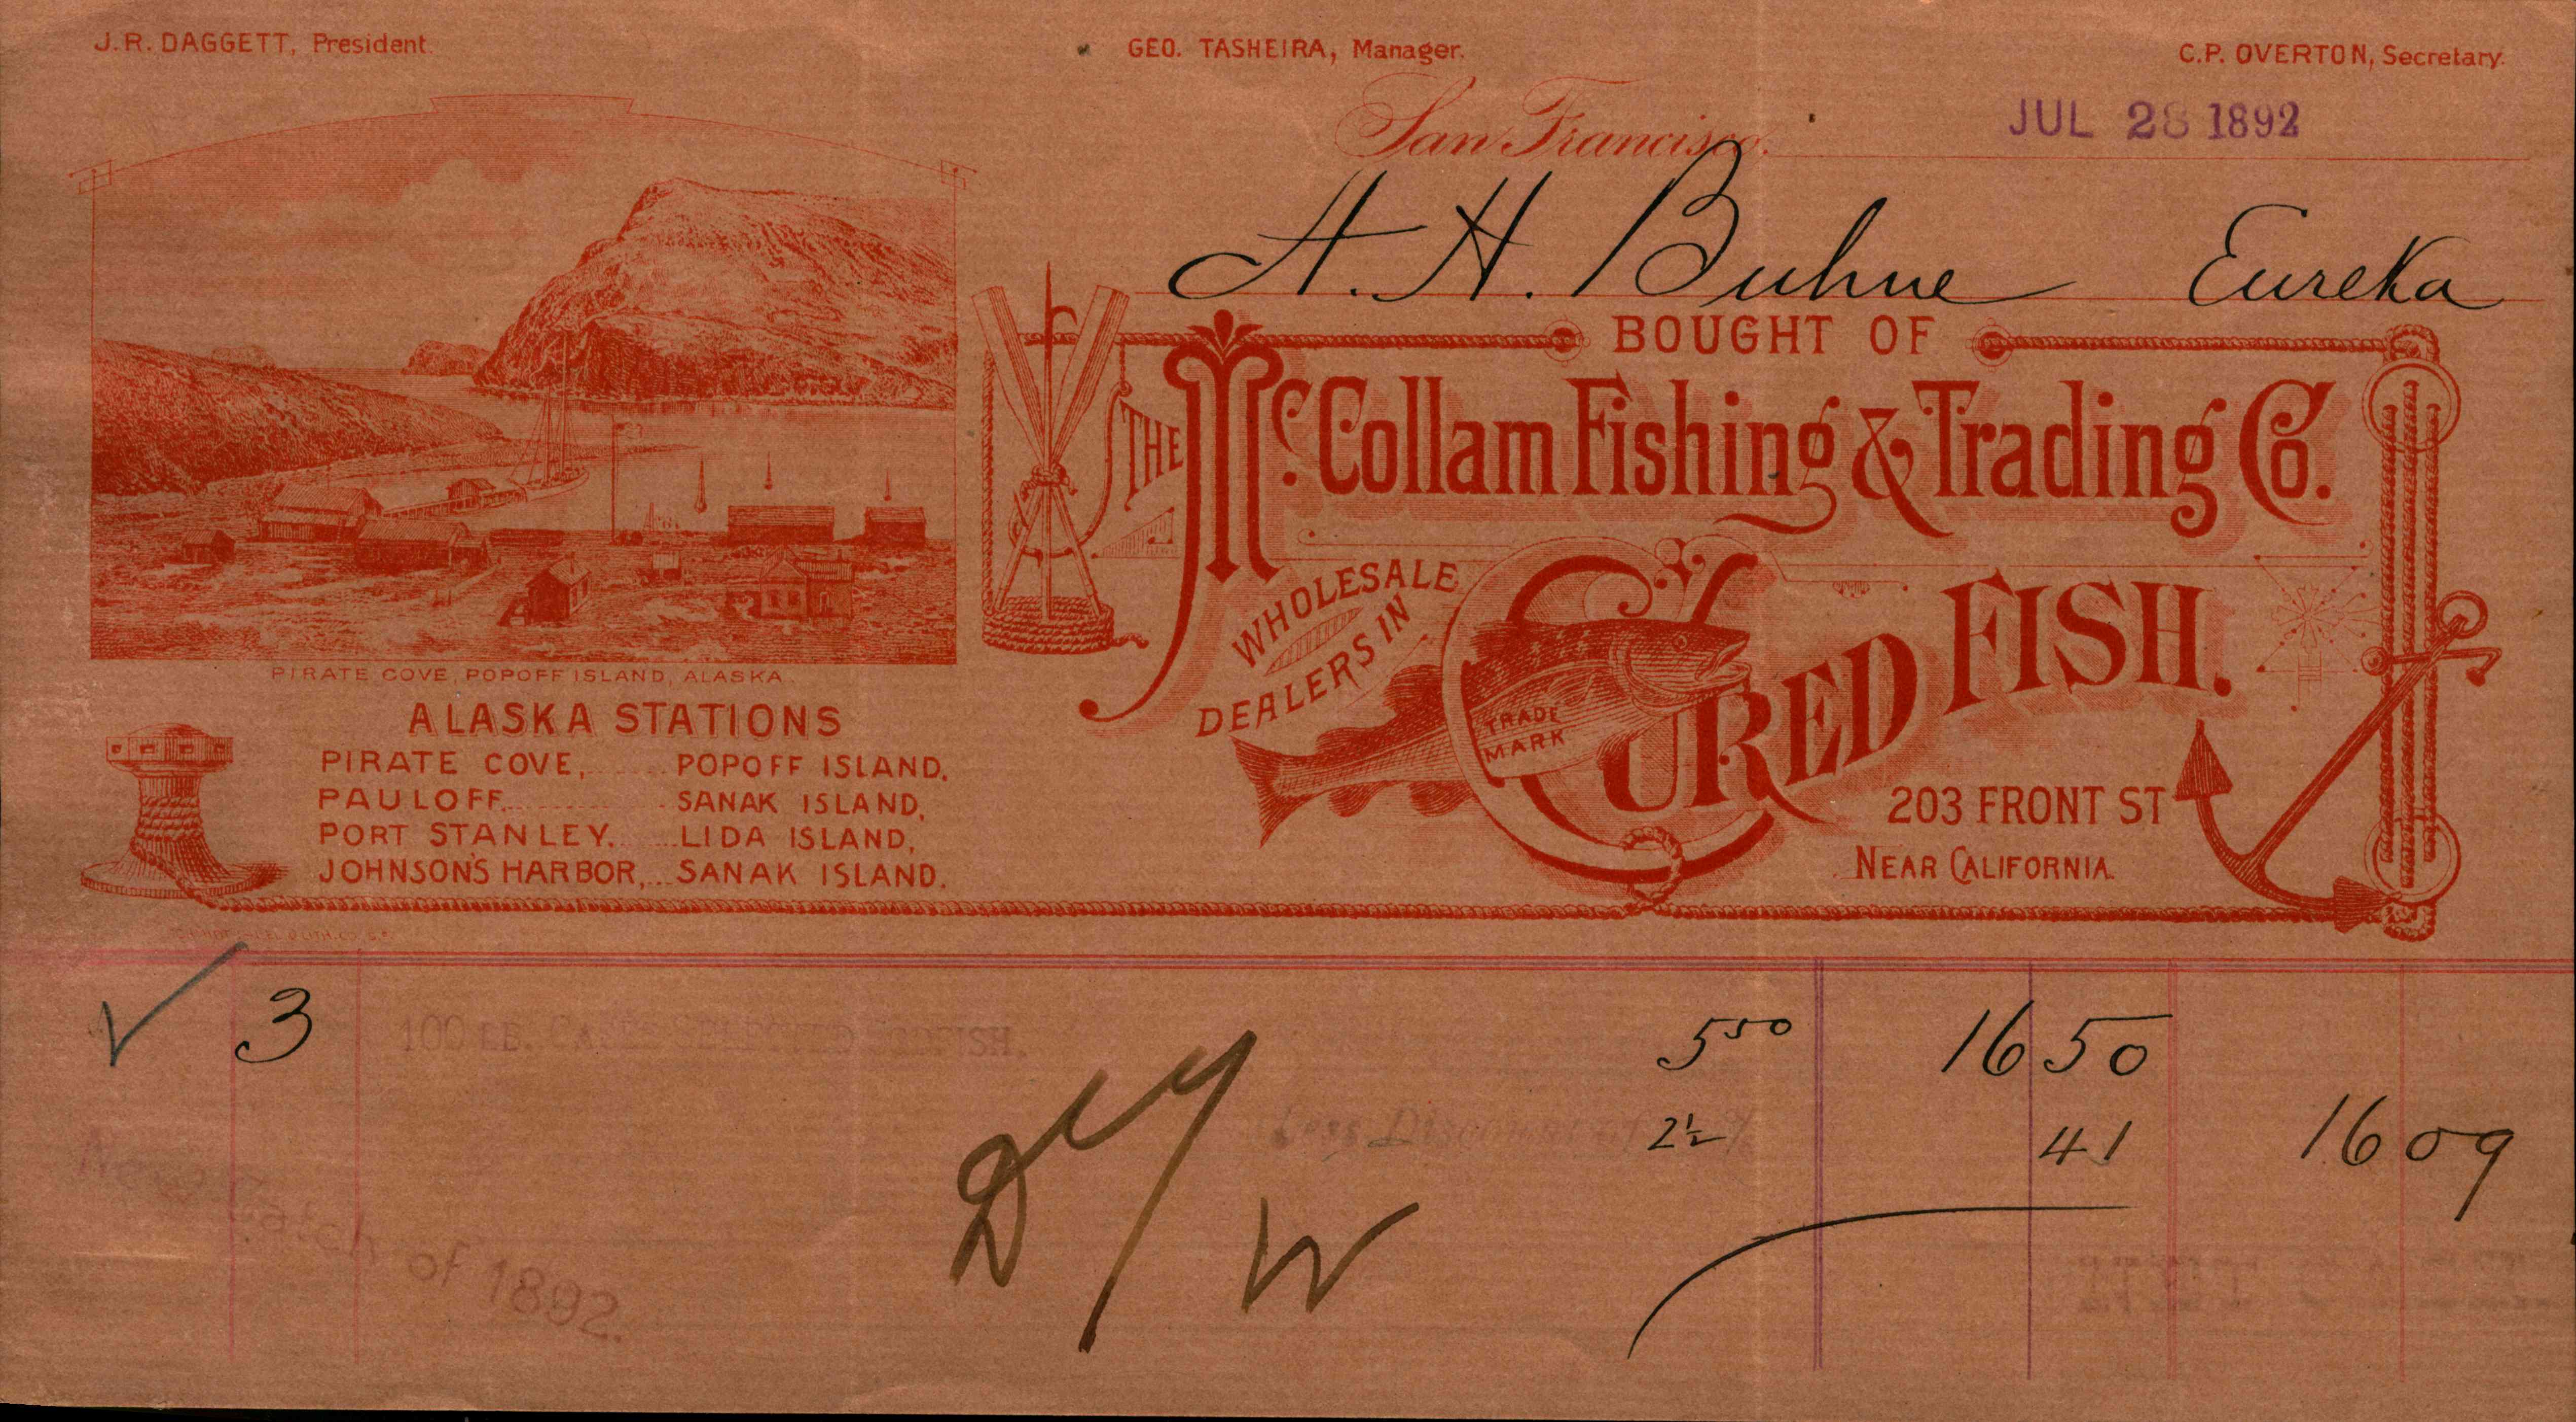 Receipt for cured fish